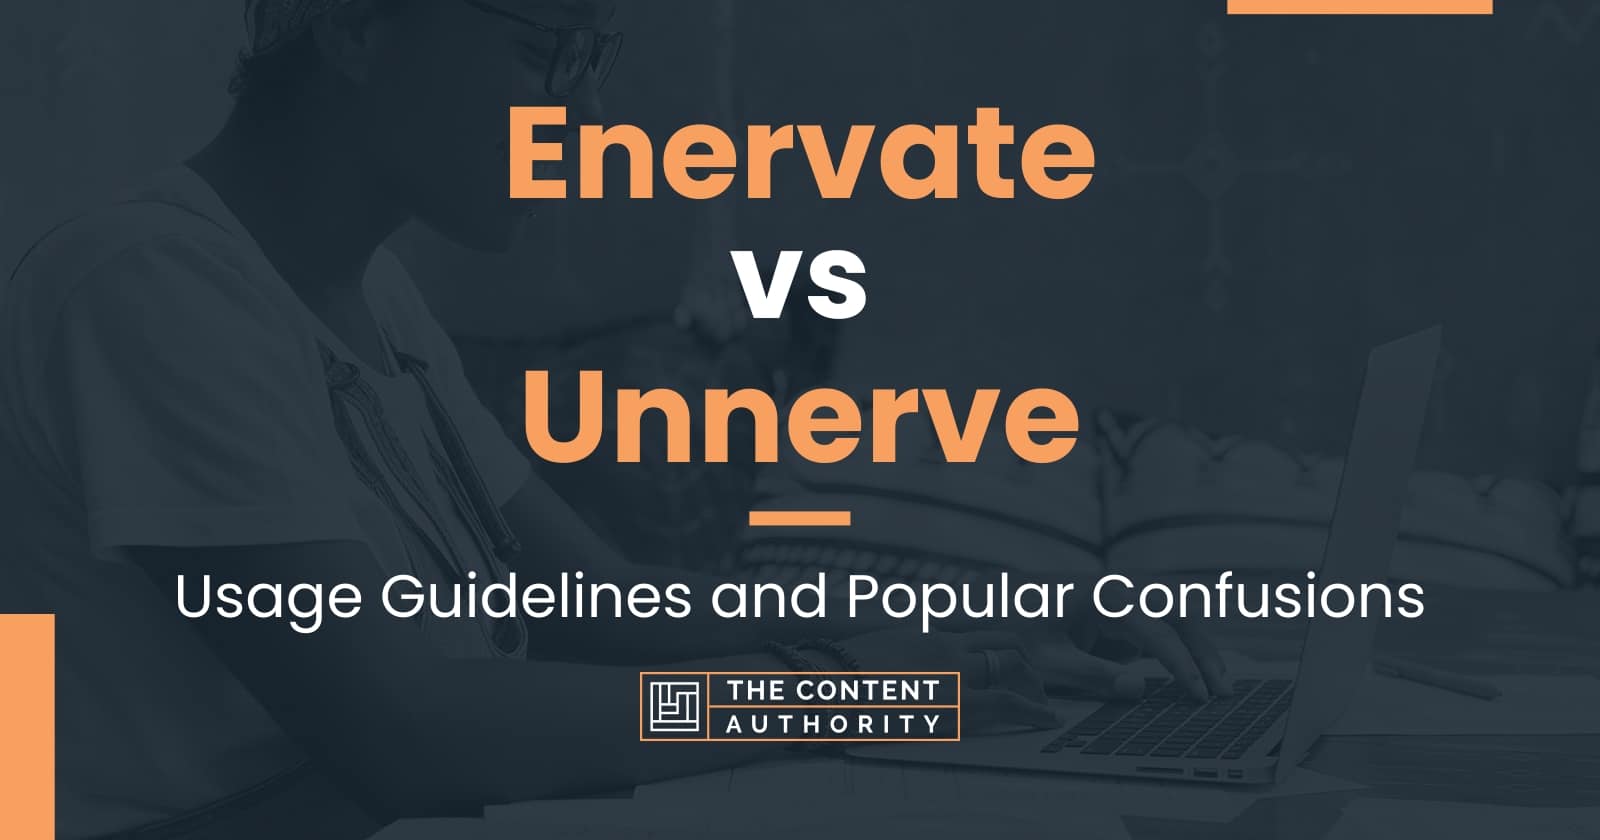 Enervate vs Unnerve: Usage Guidelines and Popular Confusions